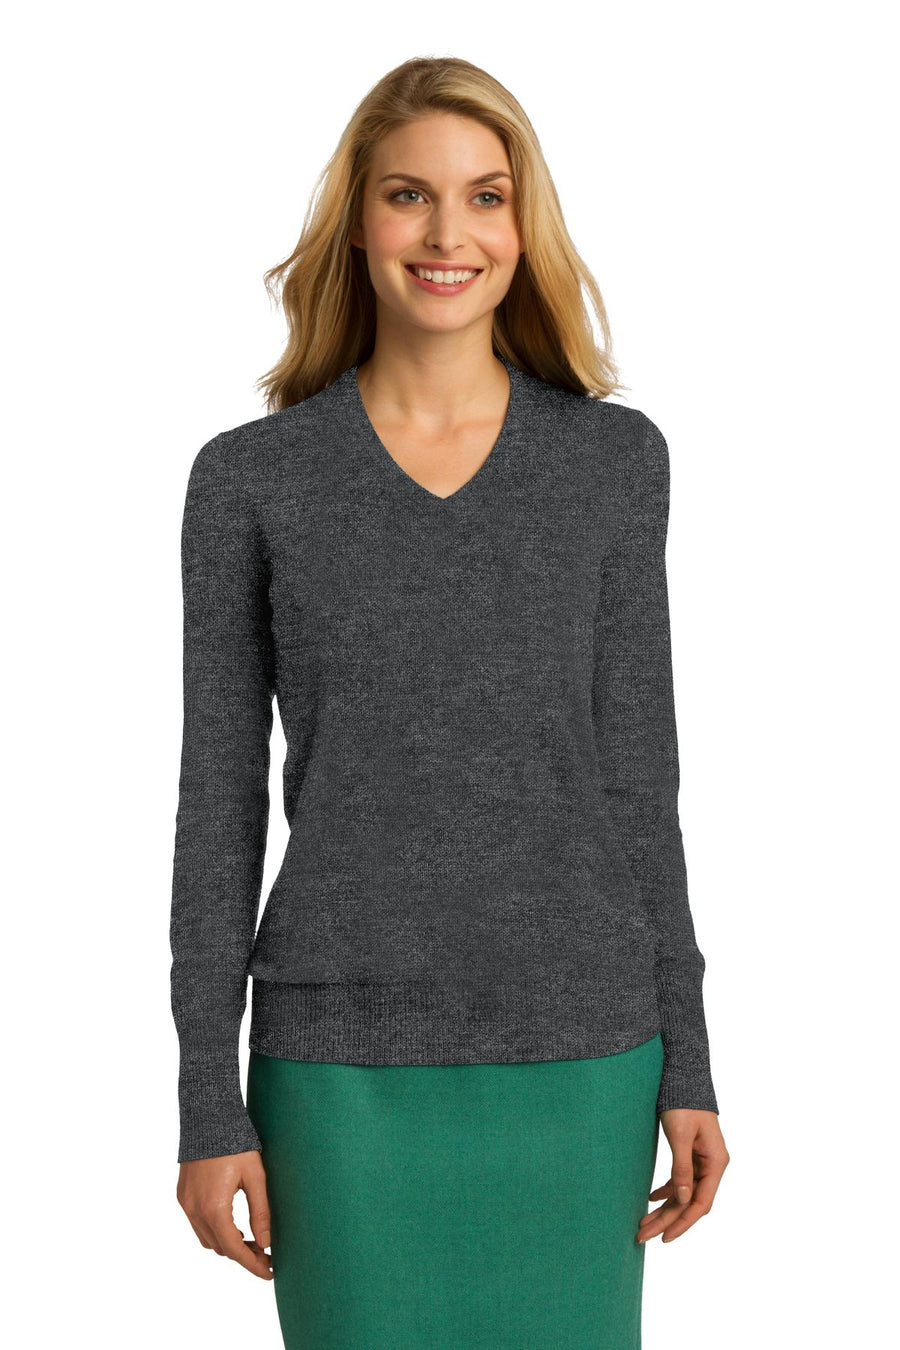 LSW285-Charcoal Heather-front_model